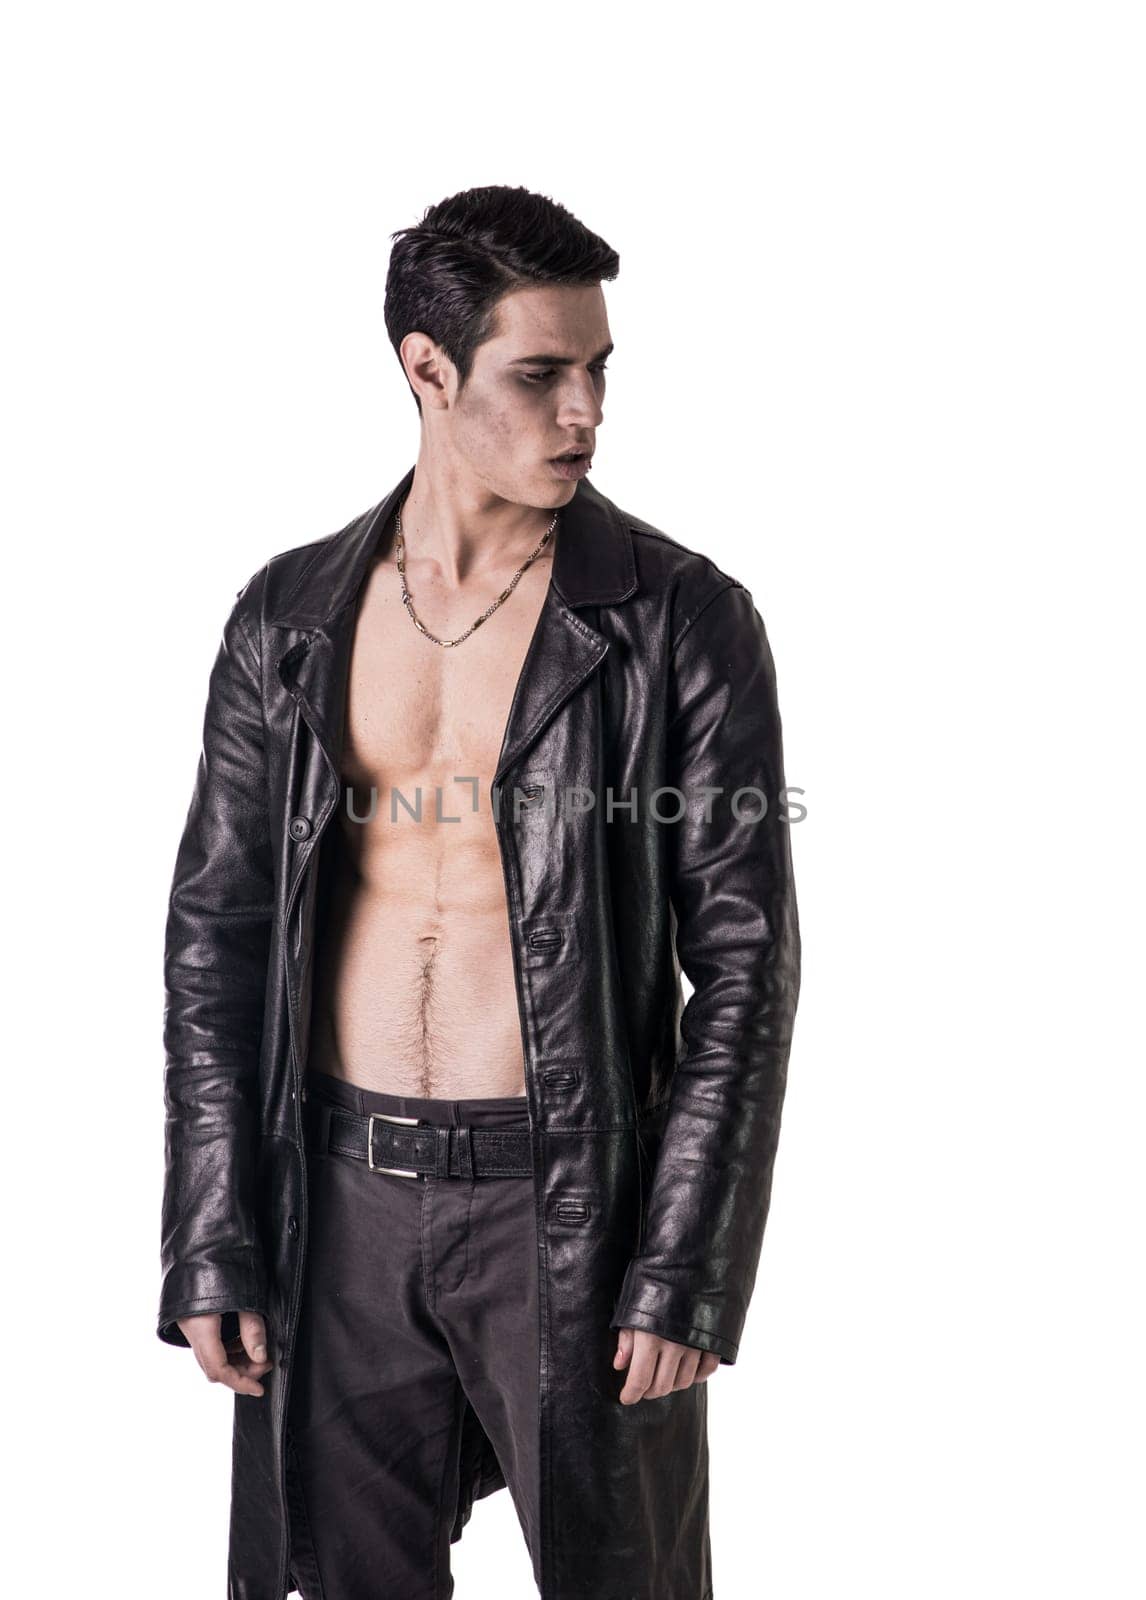 A shirtless man in a black leather jacket in a vampire look. Photo of a young and handsome vampire in a stylish black leather jacket